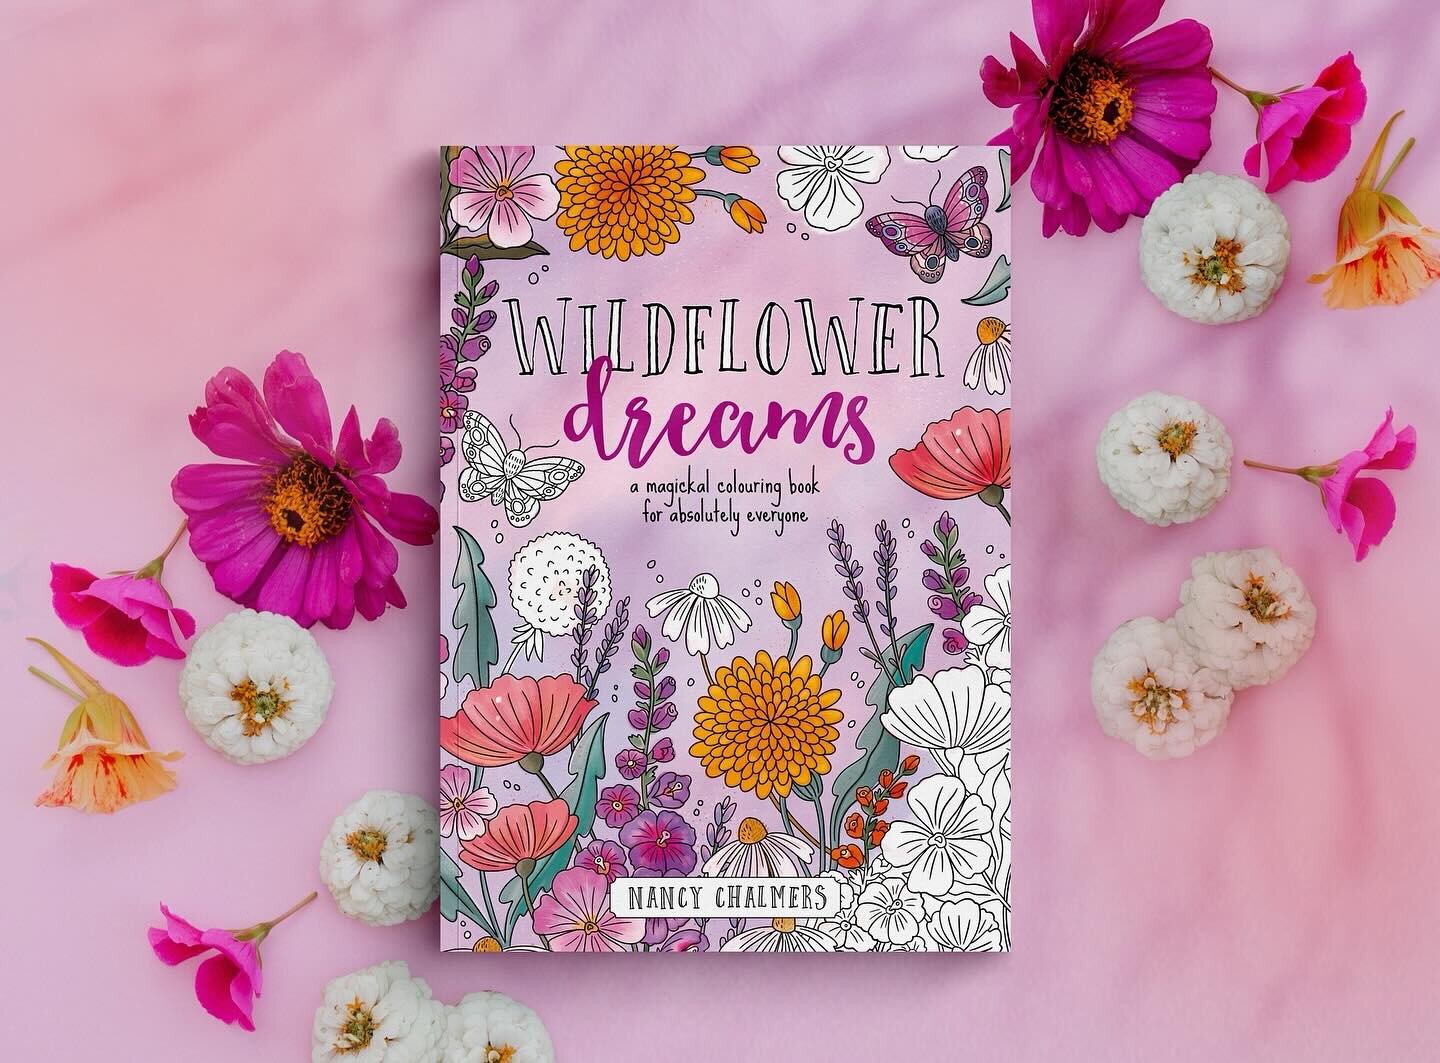 Unleash your creativity with the most magickal colouring book 🎨 #colouringbook #mindfulcolouring